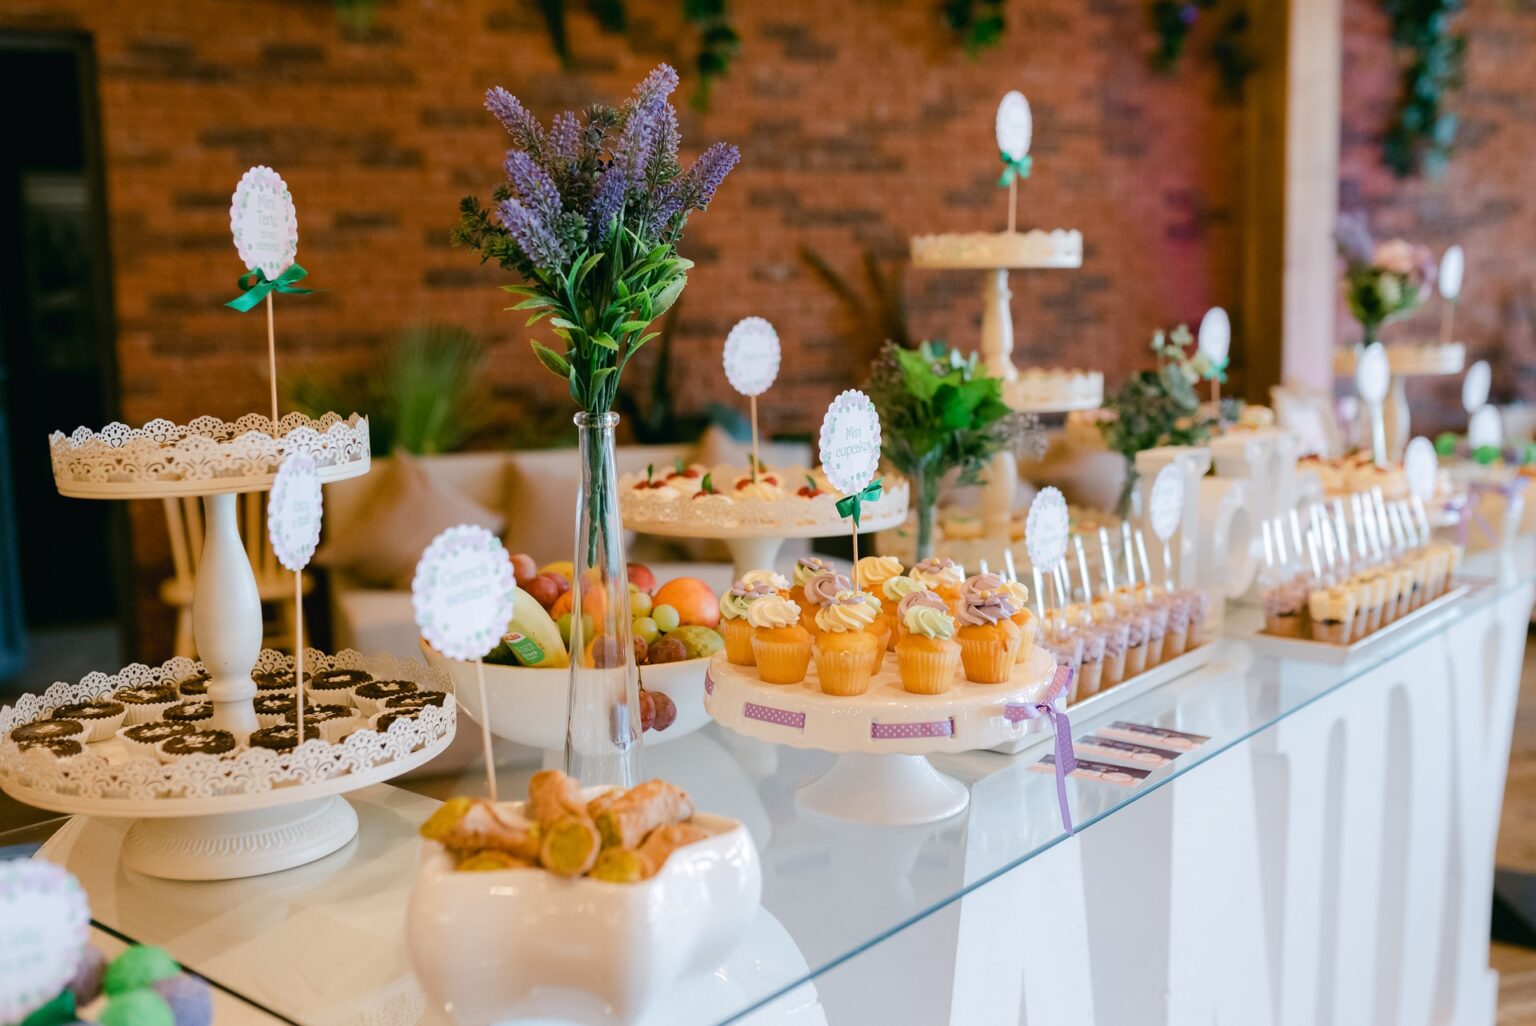 How Much are Caterers for Wedding Catering?